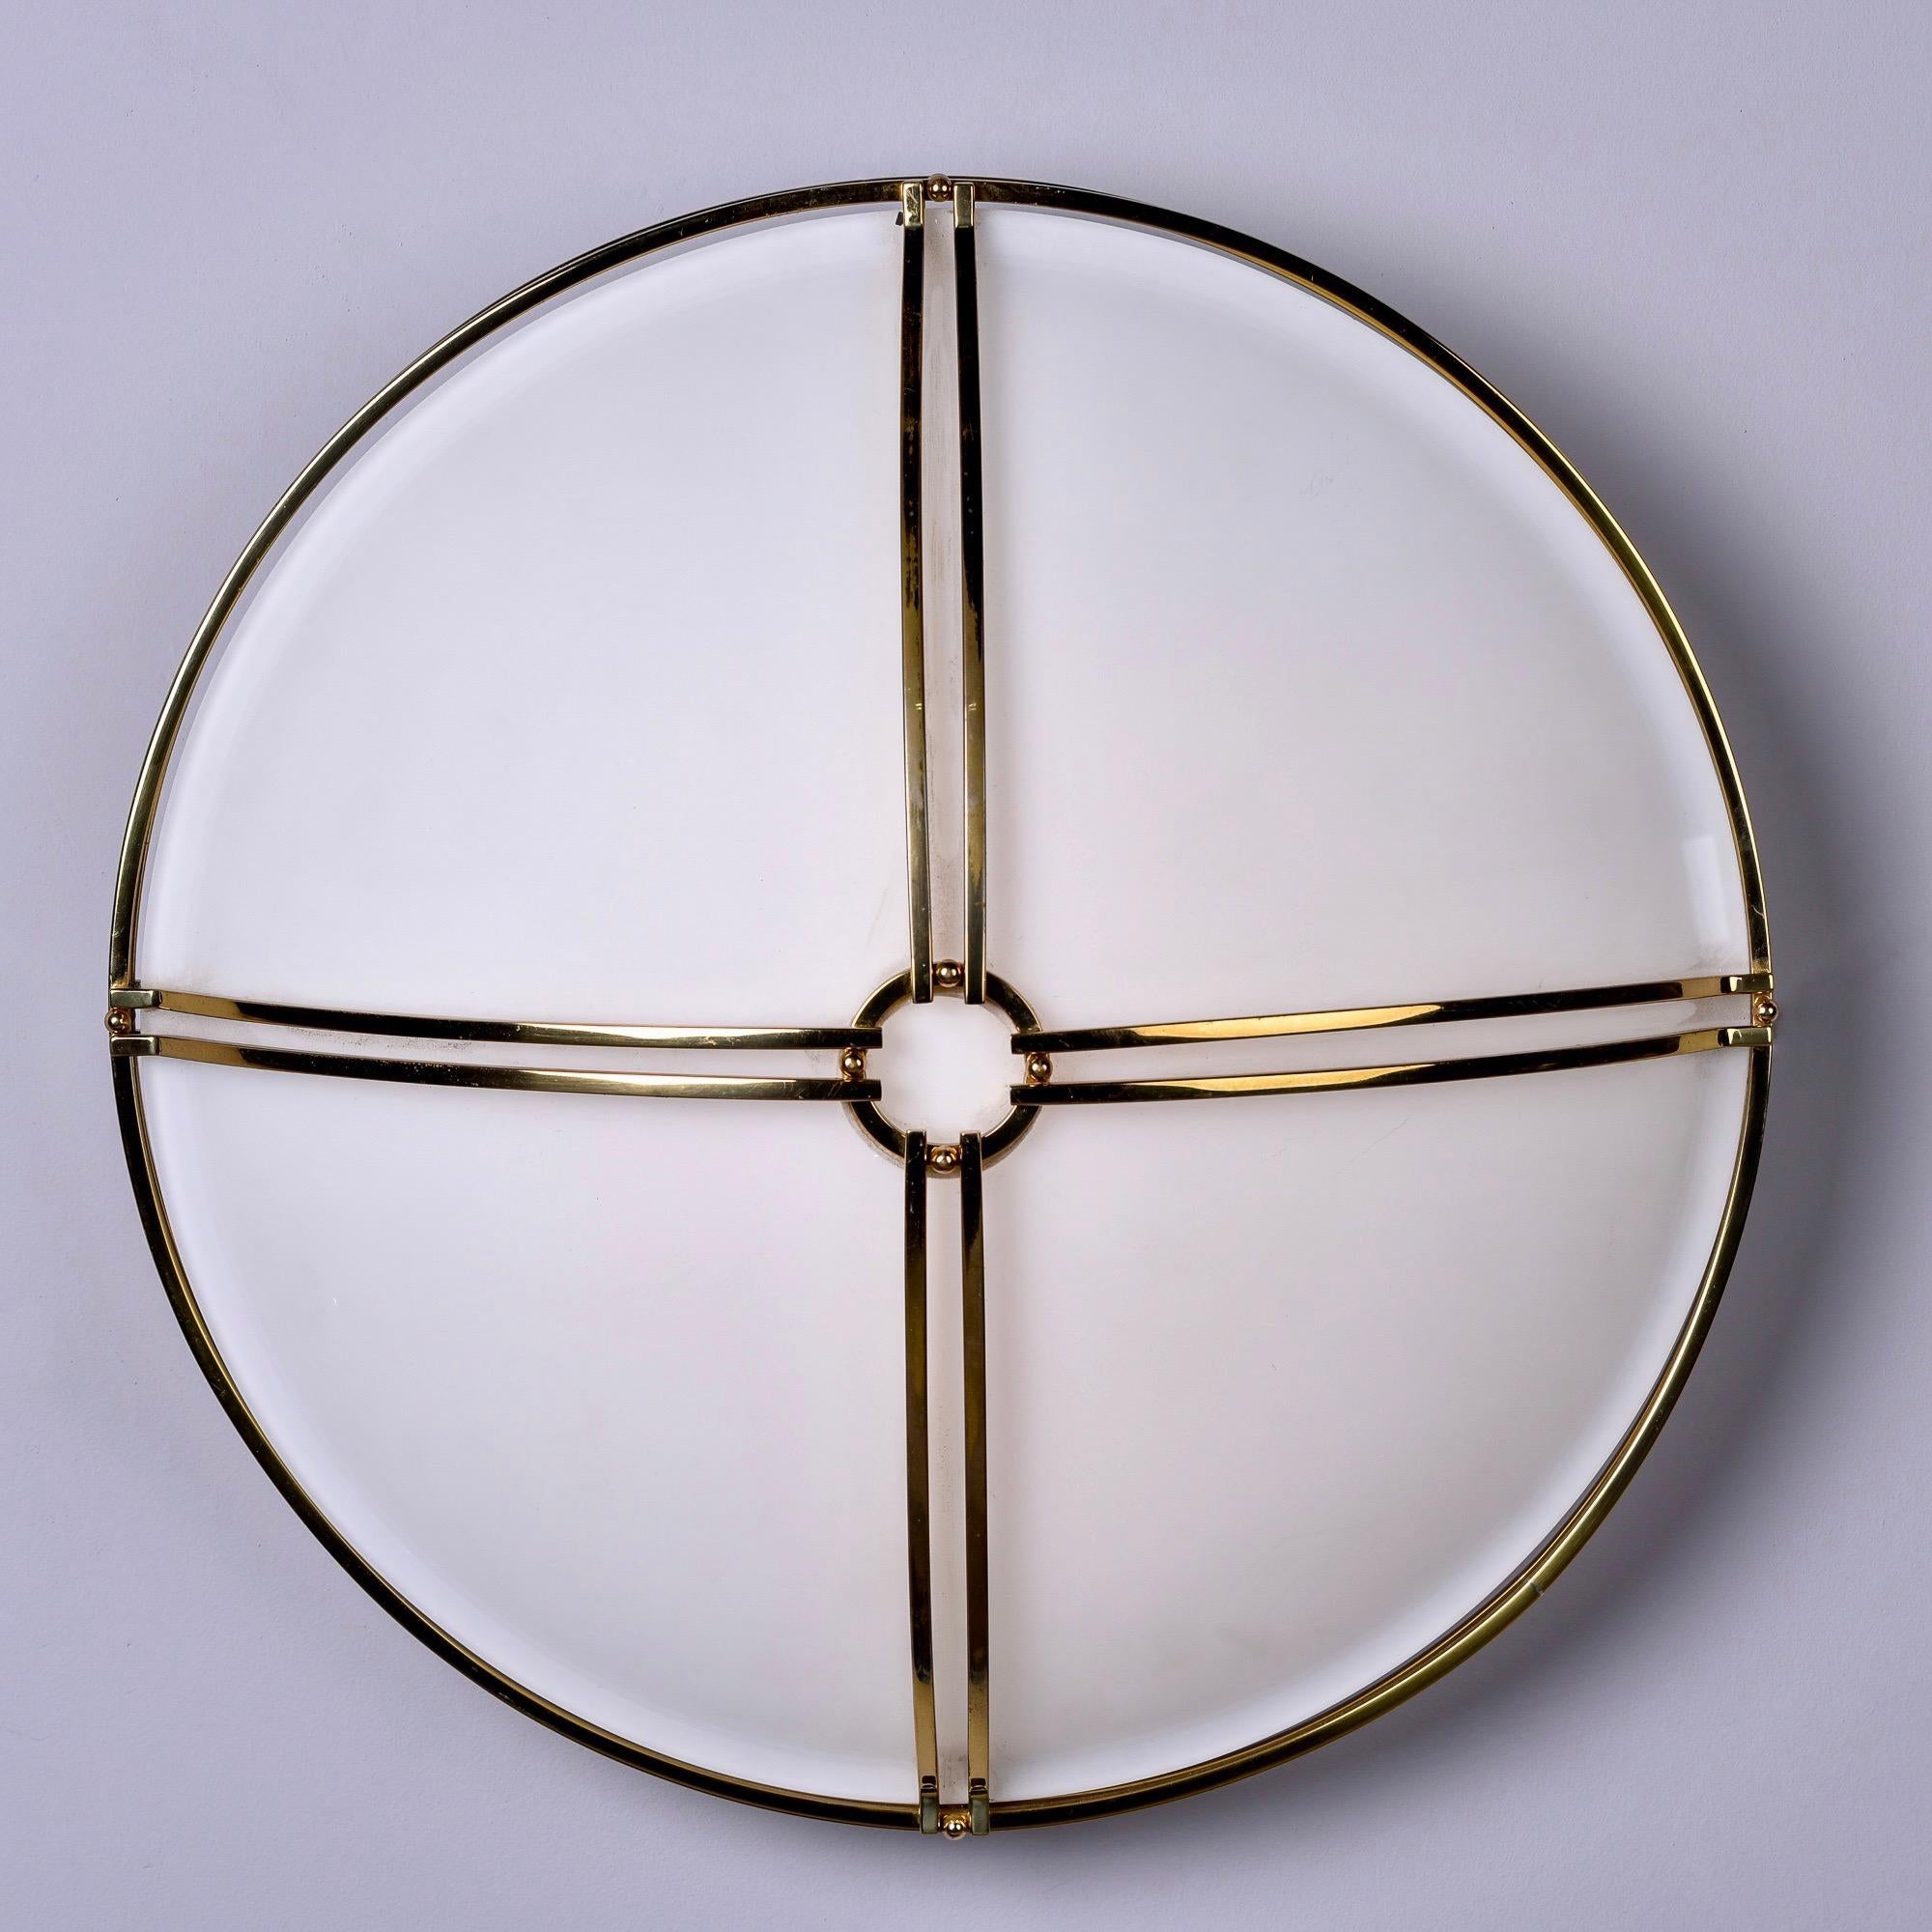 Boyd Lighting large flush mount fixture is 20” in diameter and features four standard sized sockets under white satin glass globe. Fixture is trimmed in a double strand brass X-Form overlay with a ring at the center. Simple and chic. Excellent